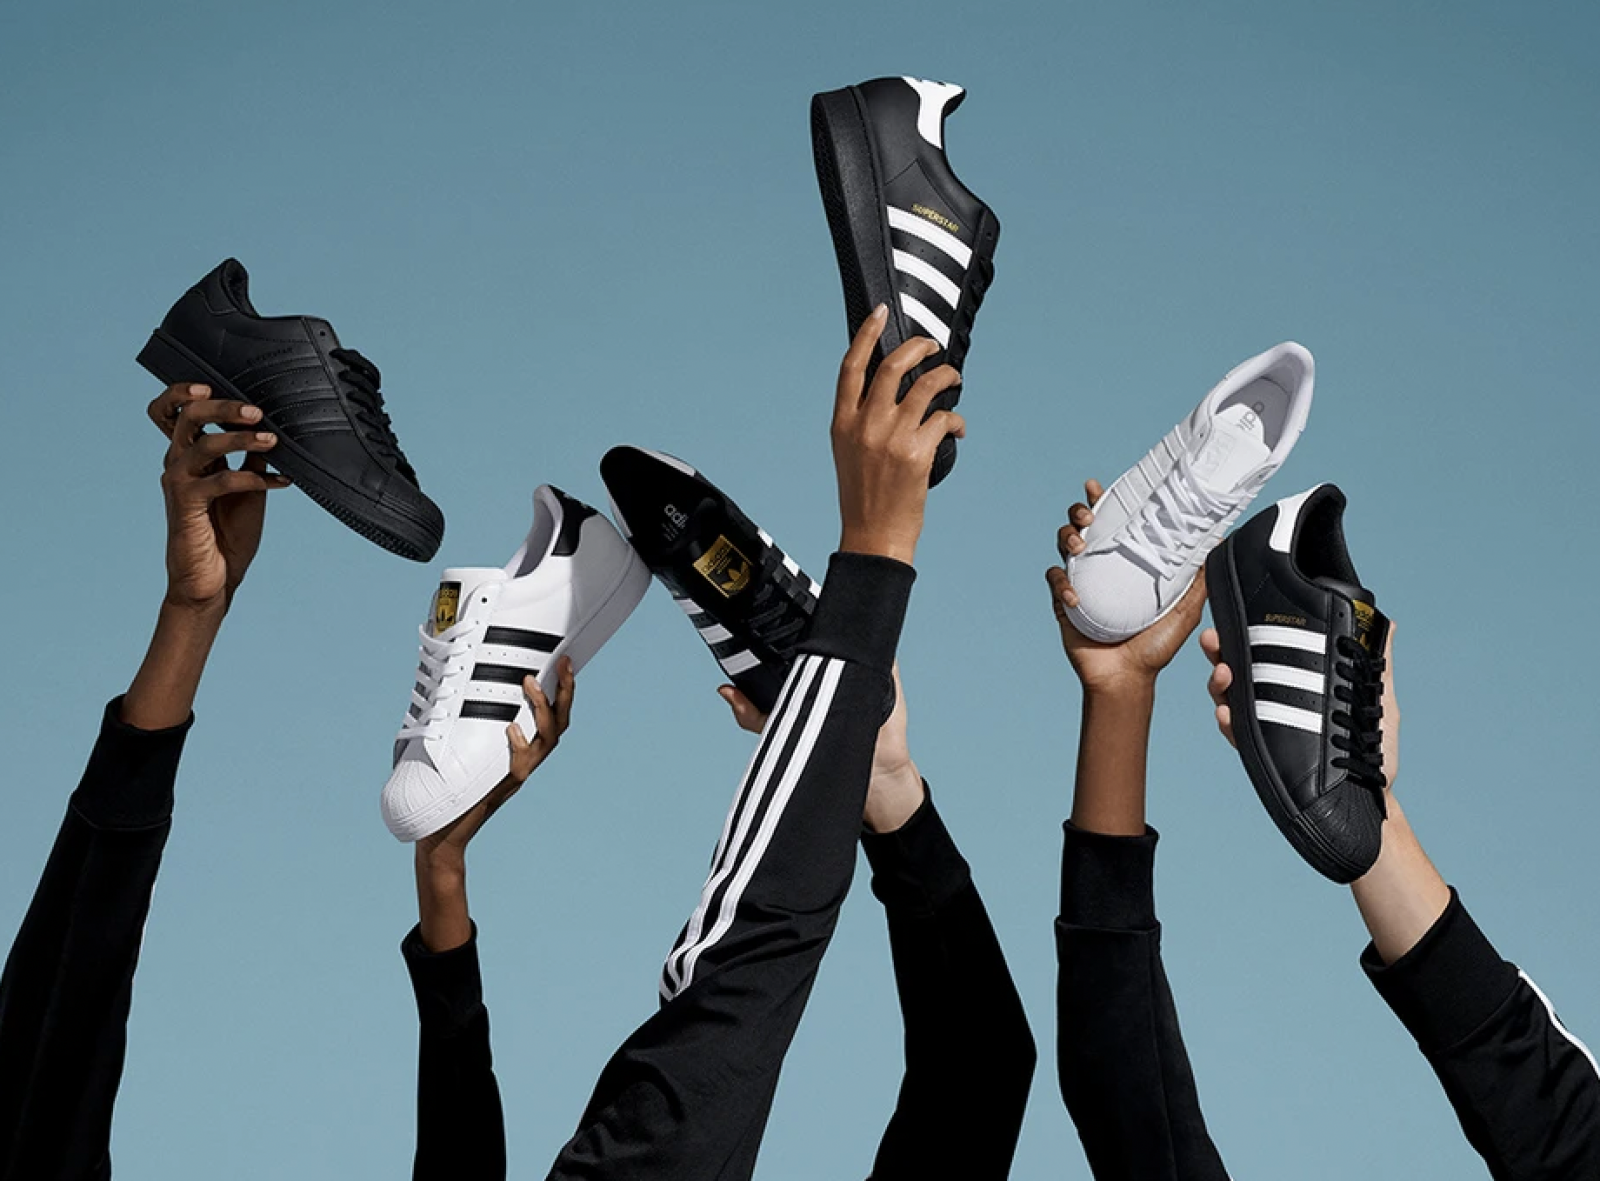 Verknald fiets wagon H&M Prevails in Almost 25-Year-Long Fight With Adidas Over its Striped  Workout Wear - The Fashion Law